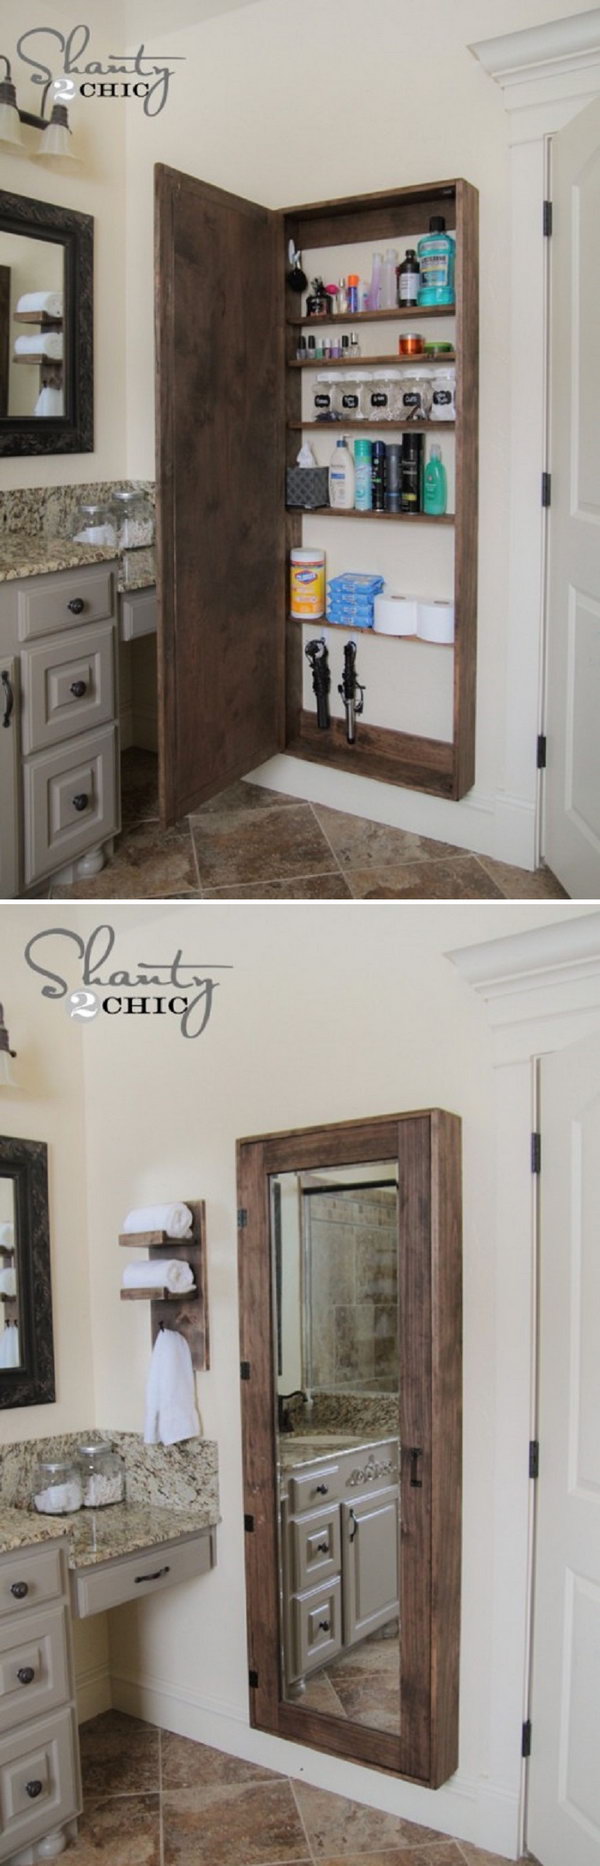 A big bathroom storage case behind the mirror to hold all the goodies. 